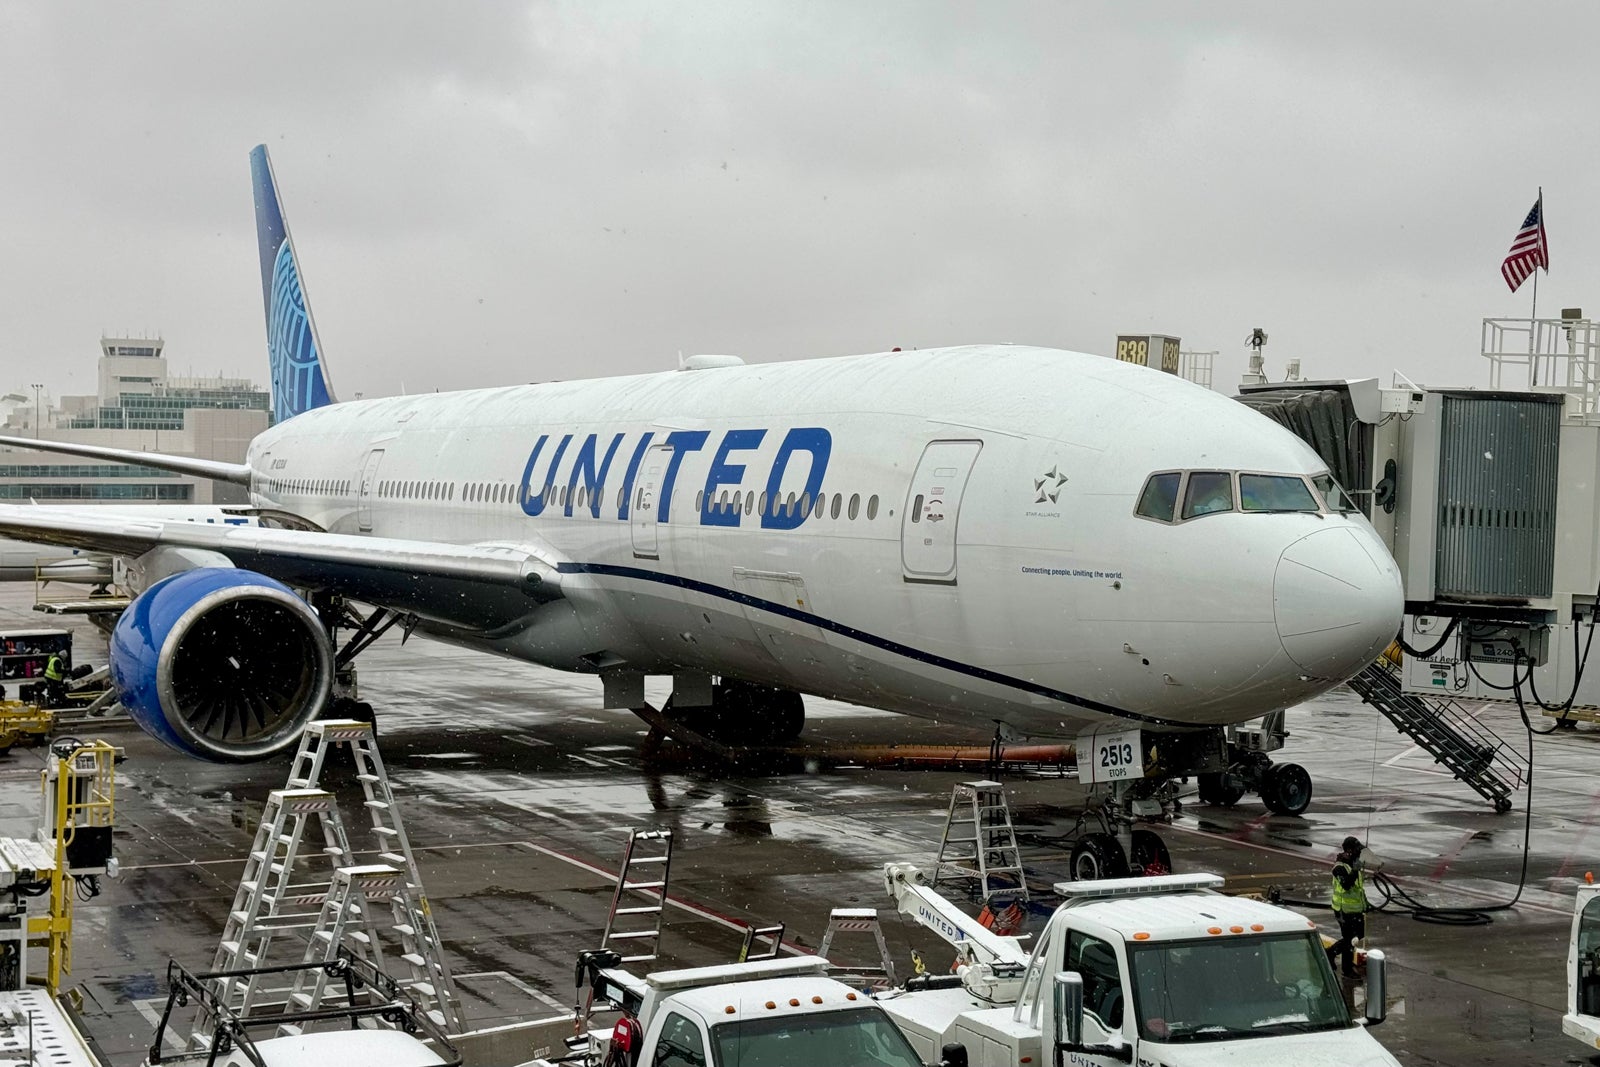 United Airlines MileagePlus: Guide to earning and redeeming miles, elite status and more